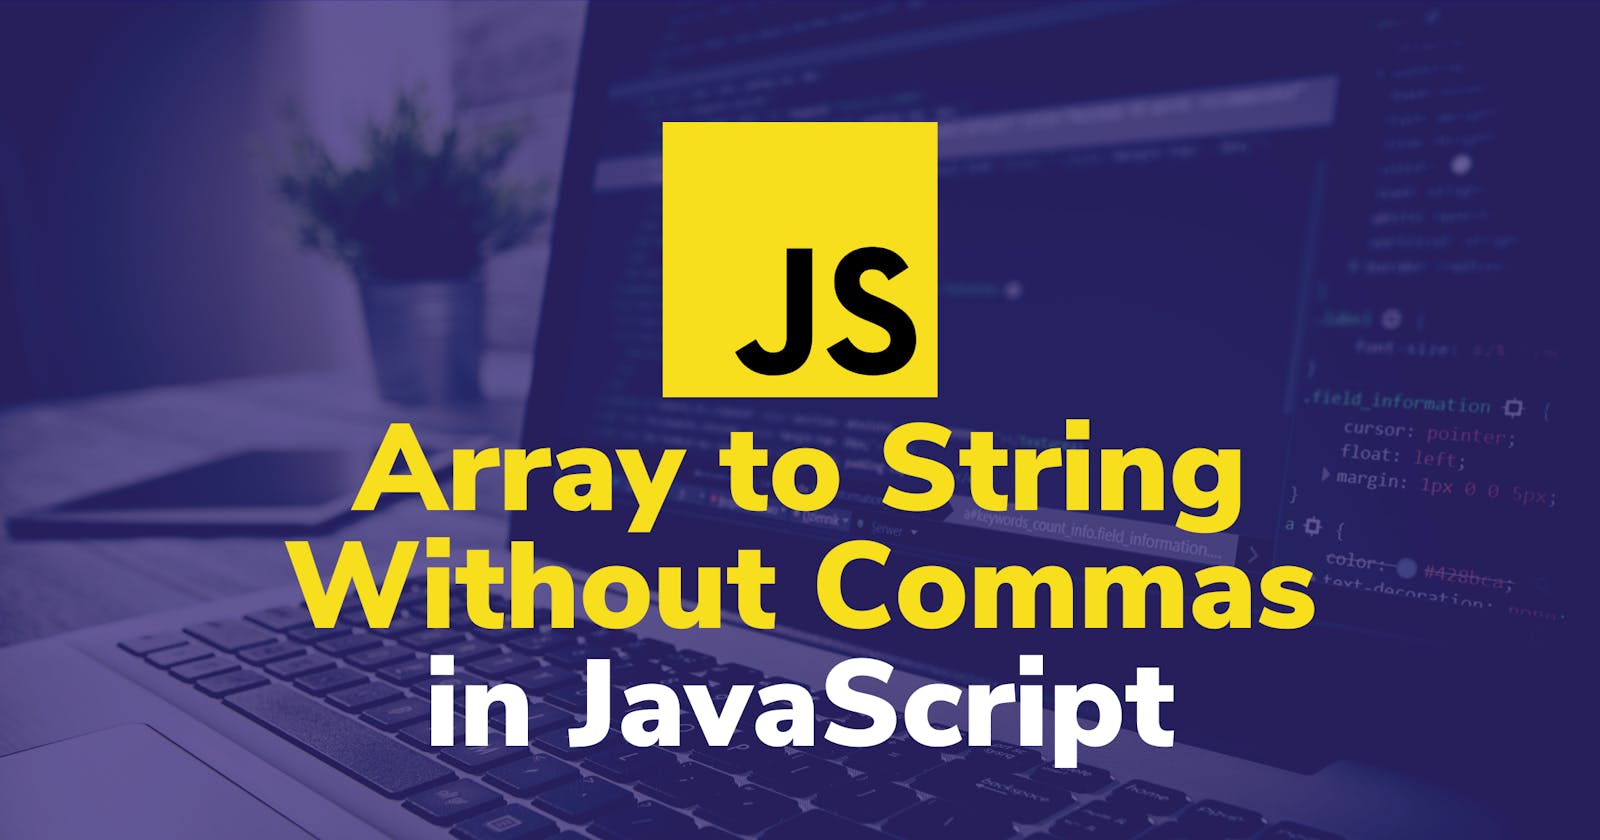 Array to String Without Commas in JavaScript